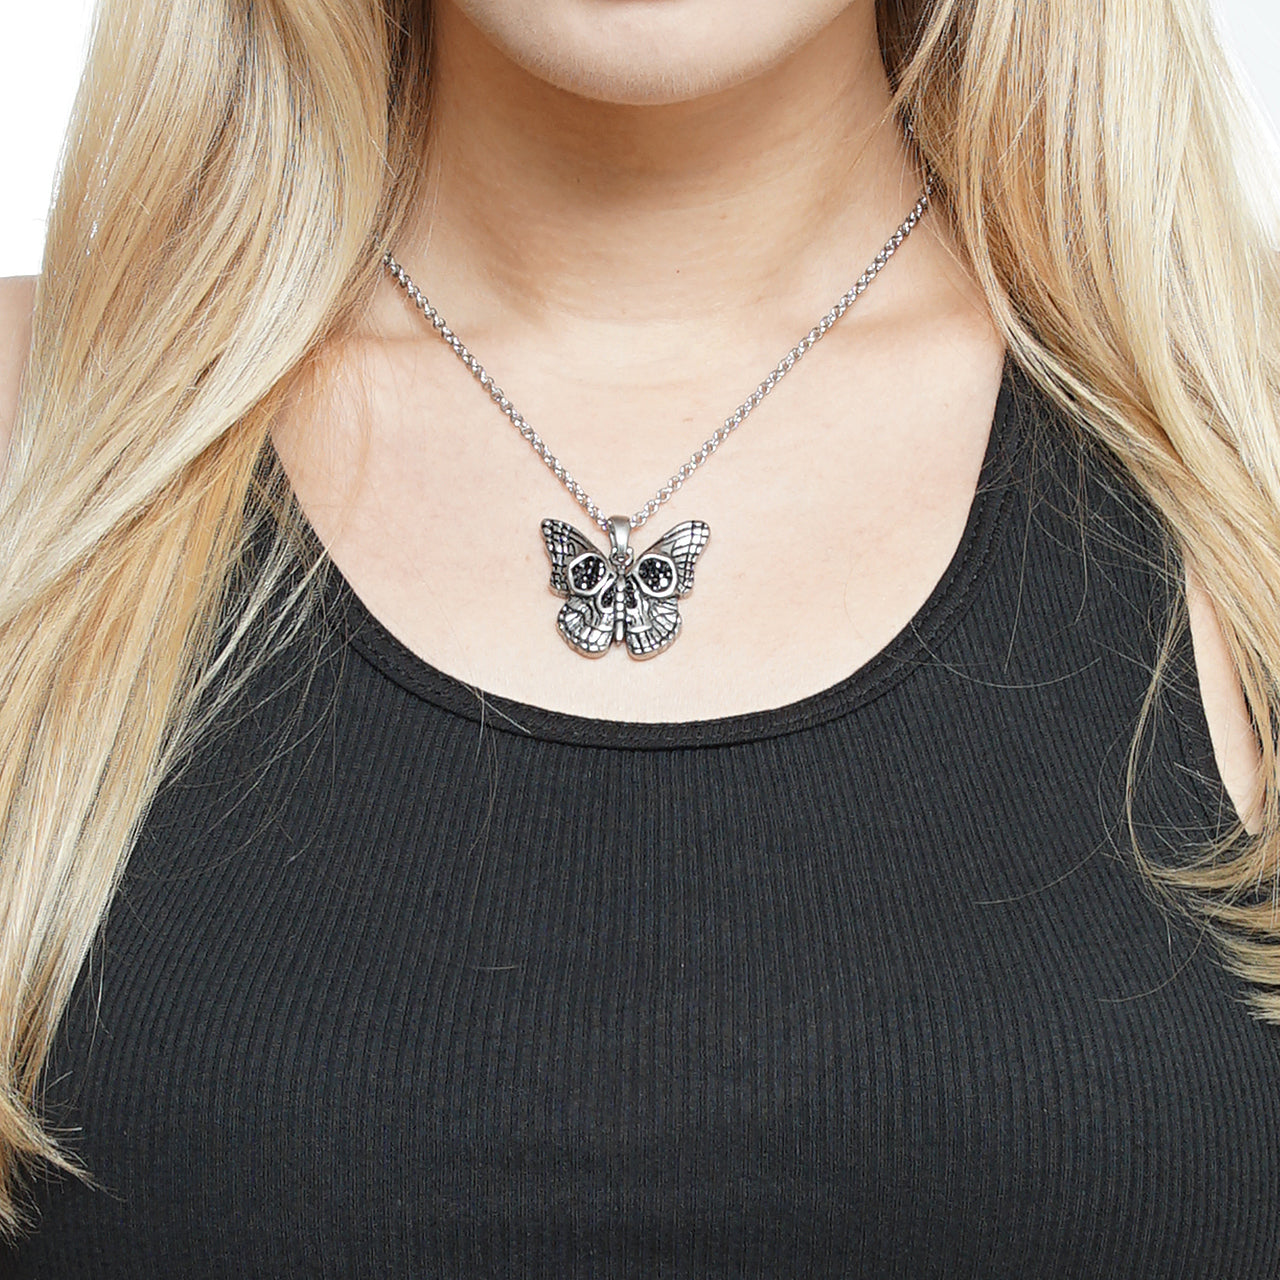 Butterfly skull necklace